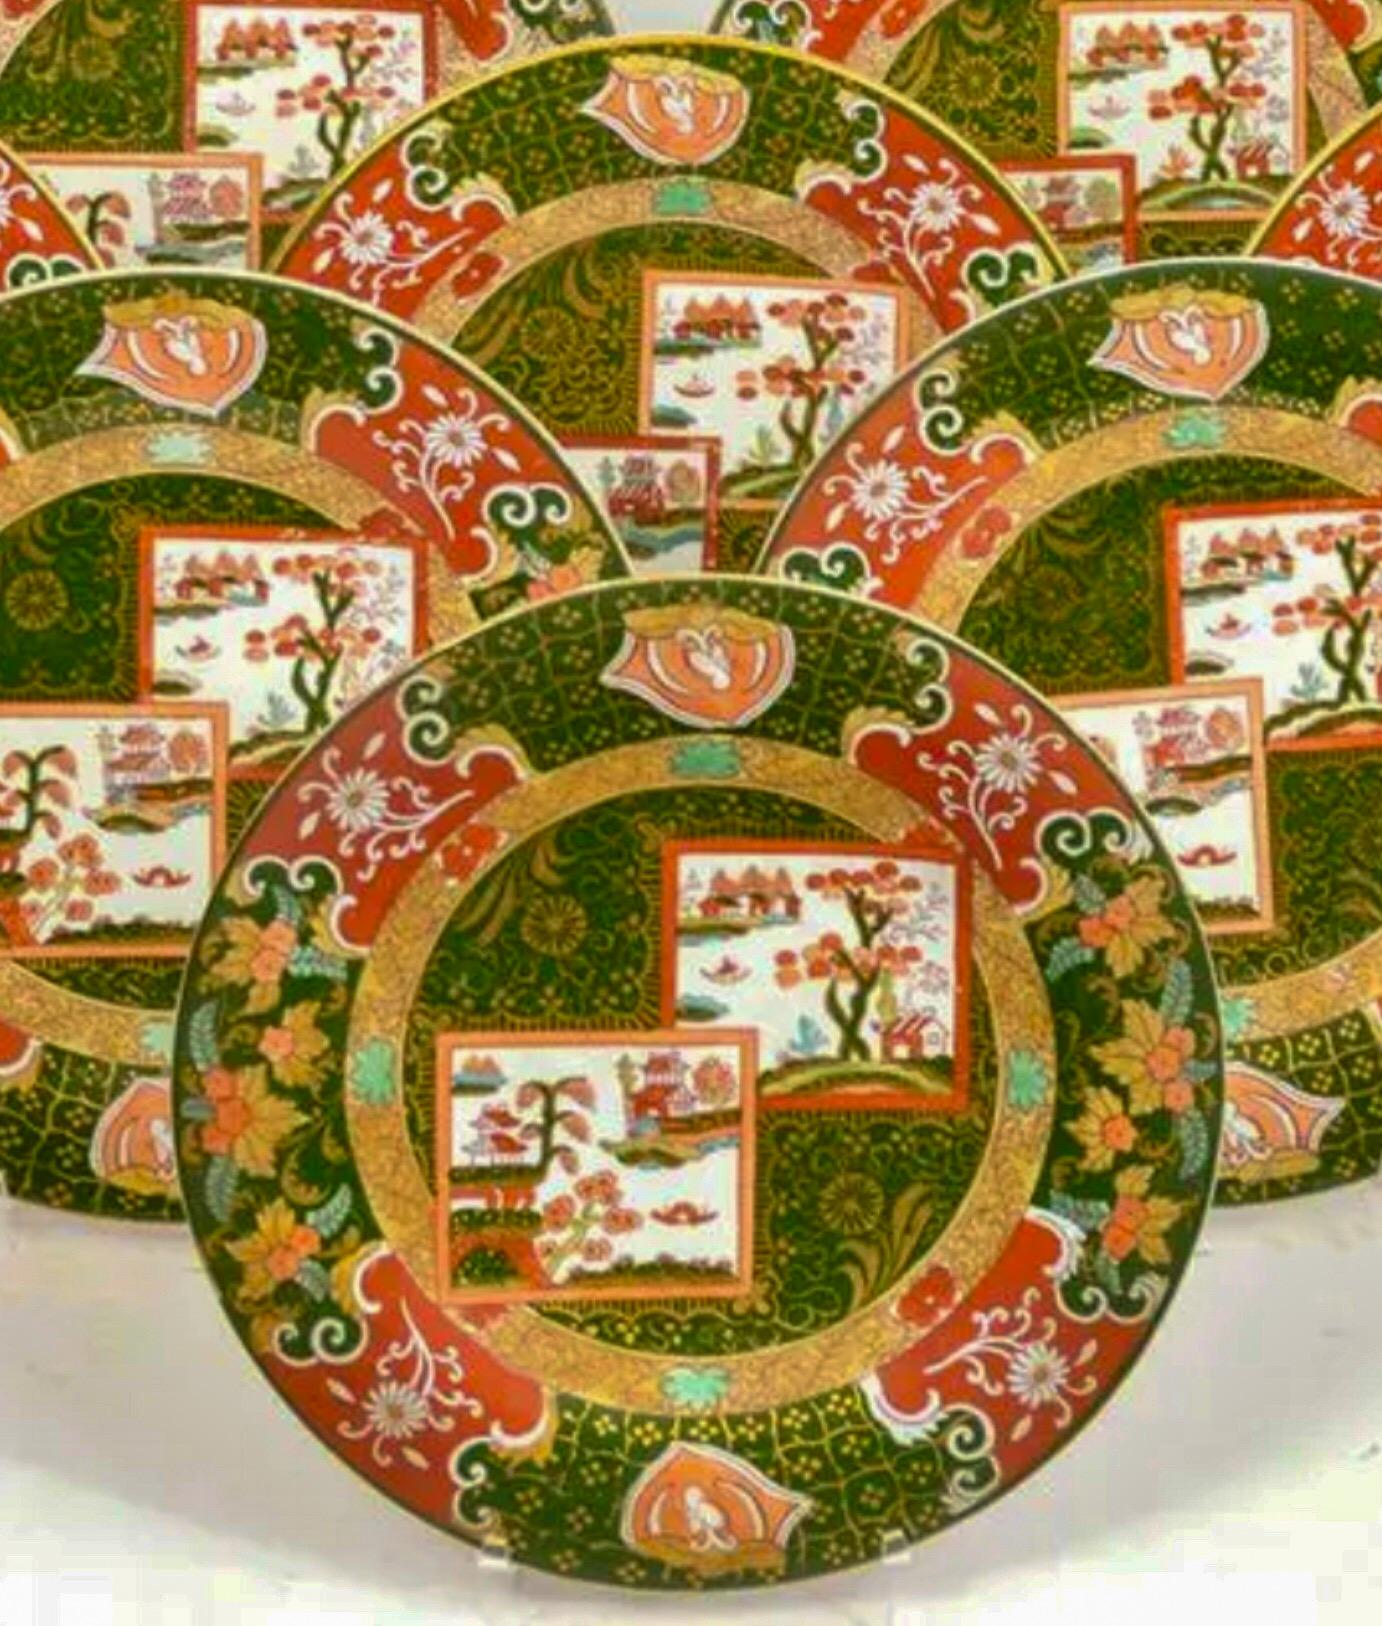 Early English William Whiteley Ltd of London Ironstone Imari Plates, S/10 In Good Condition For Sale In Kennesaw, GA